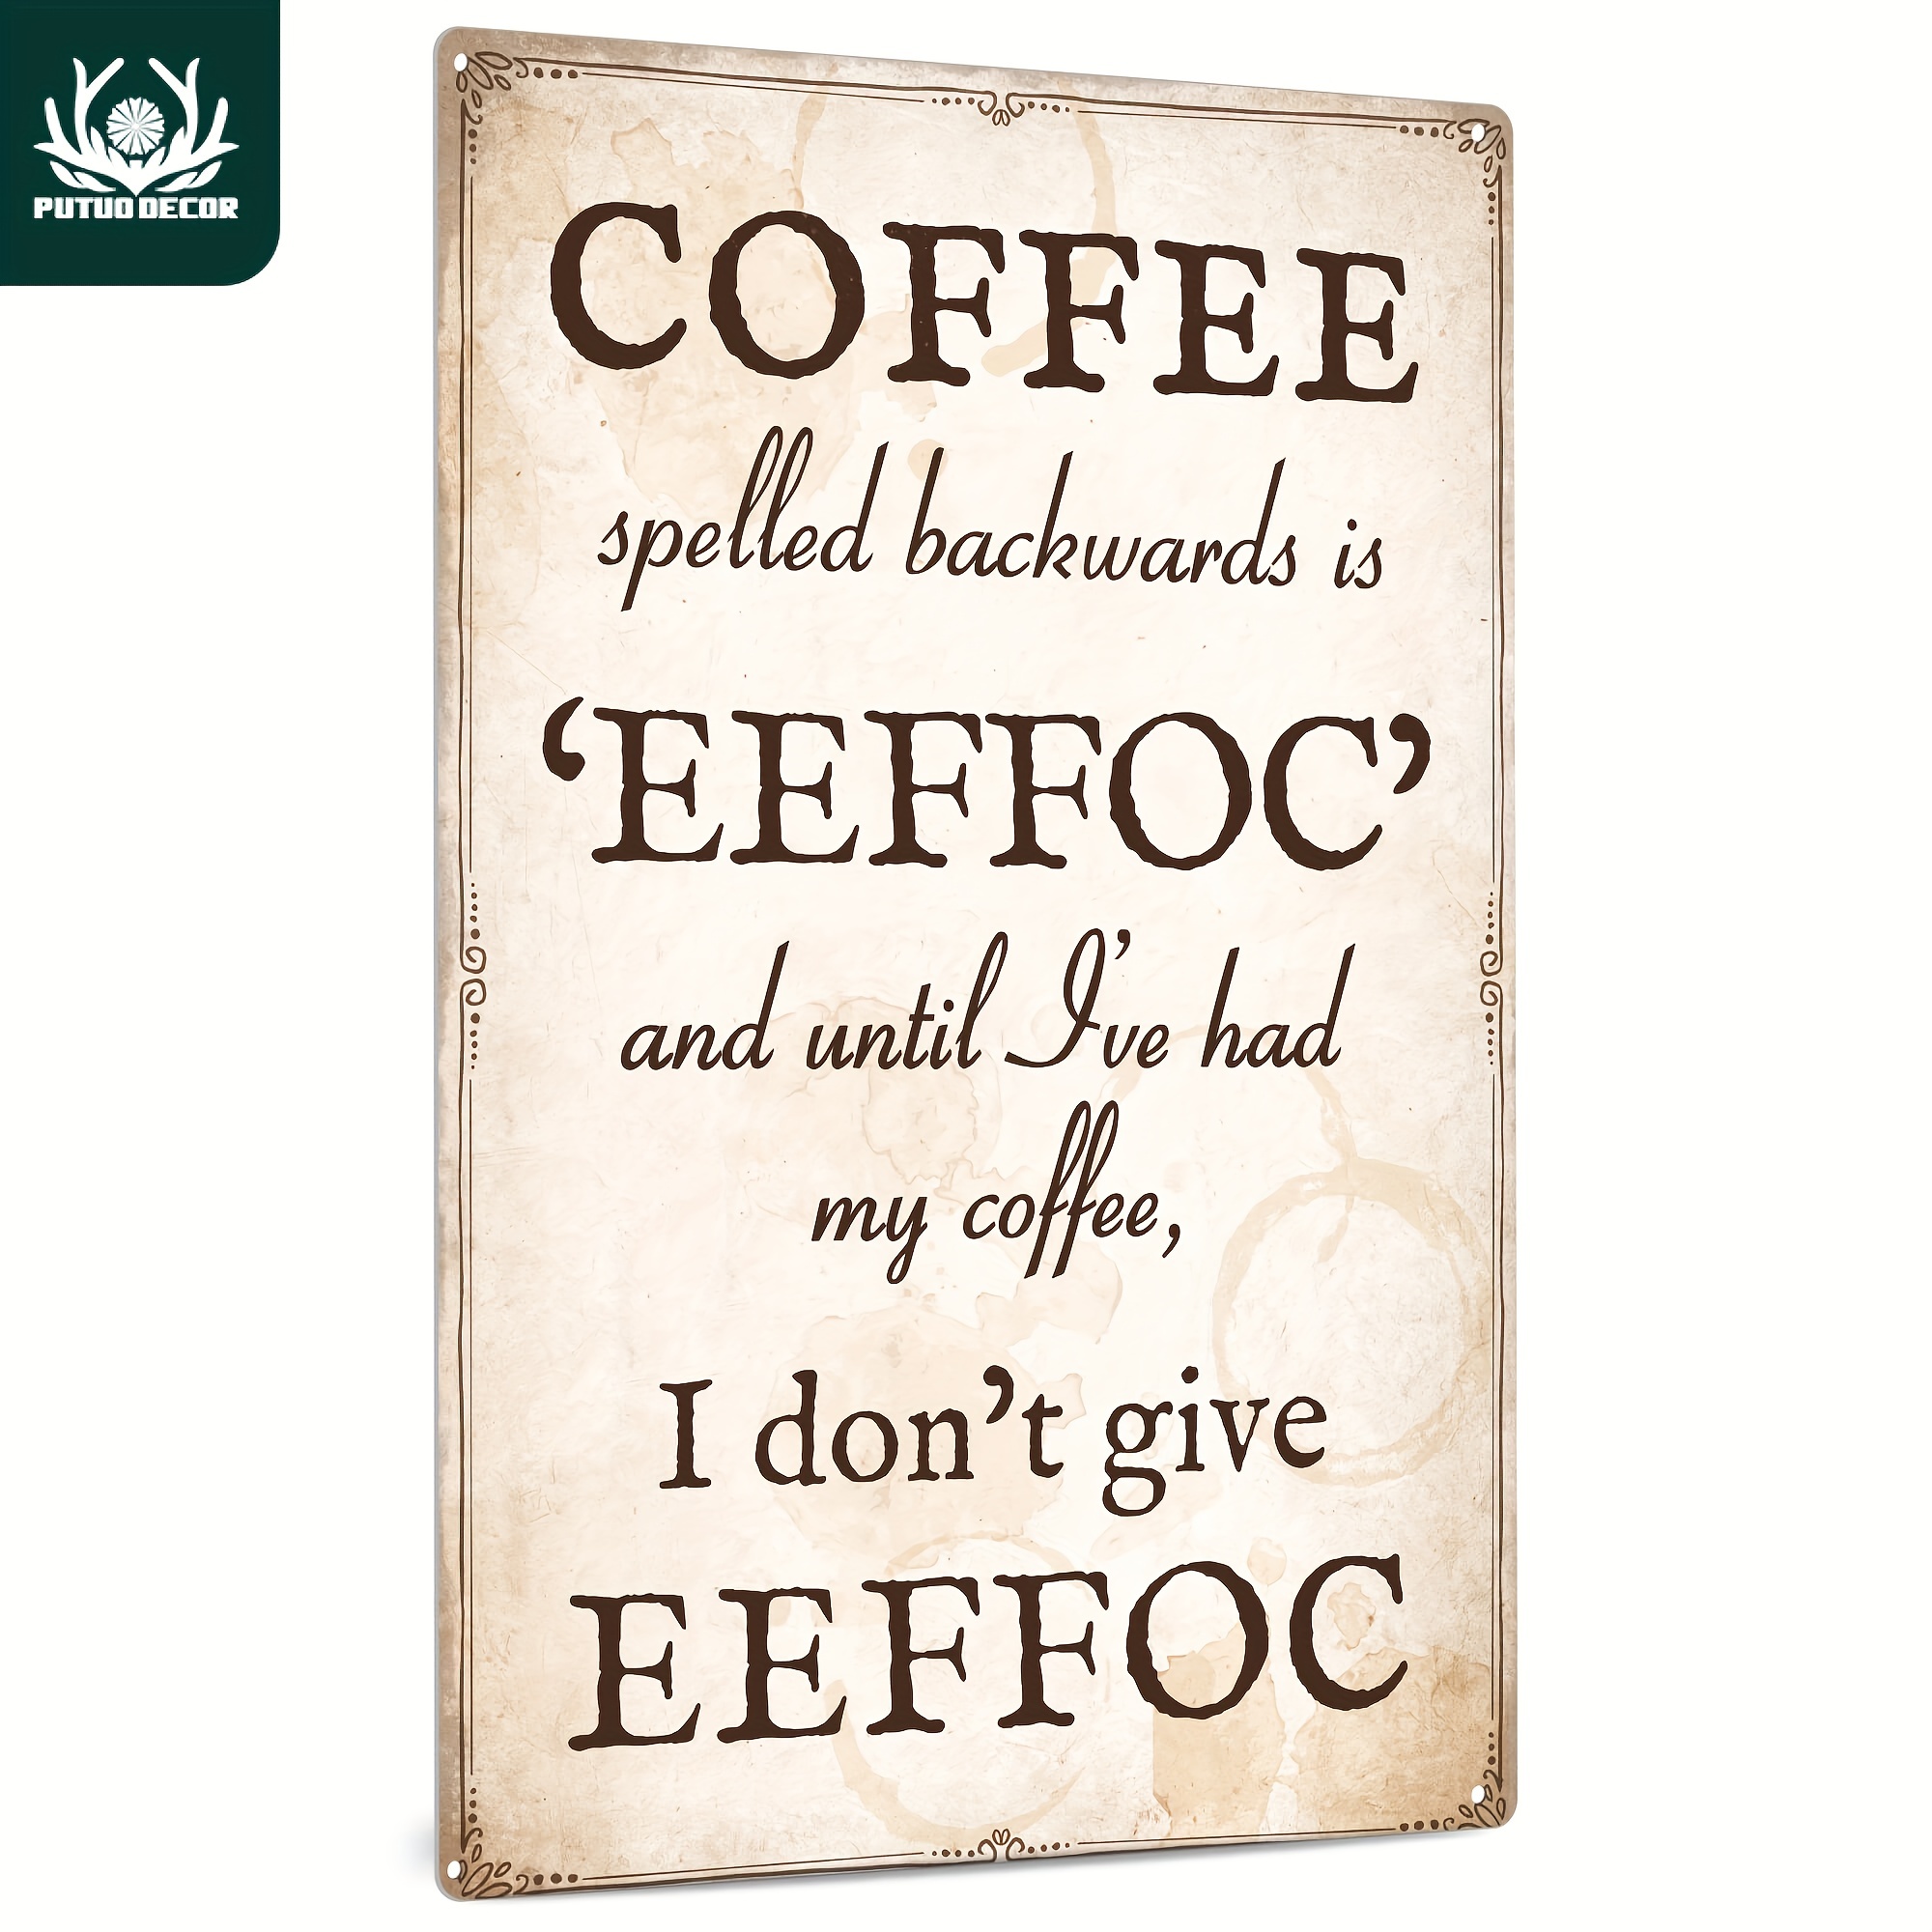 

1pc, Eeffoc Coffee Metal Tin Sign - Vintage Plaque Decor For Home, Restaurant, Bar, Cafe, Garage - Water-proof And Dust-proof